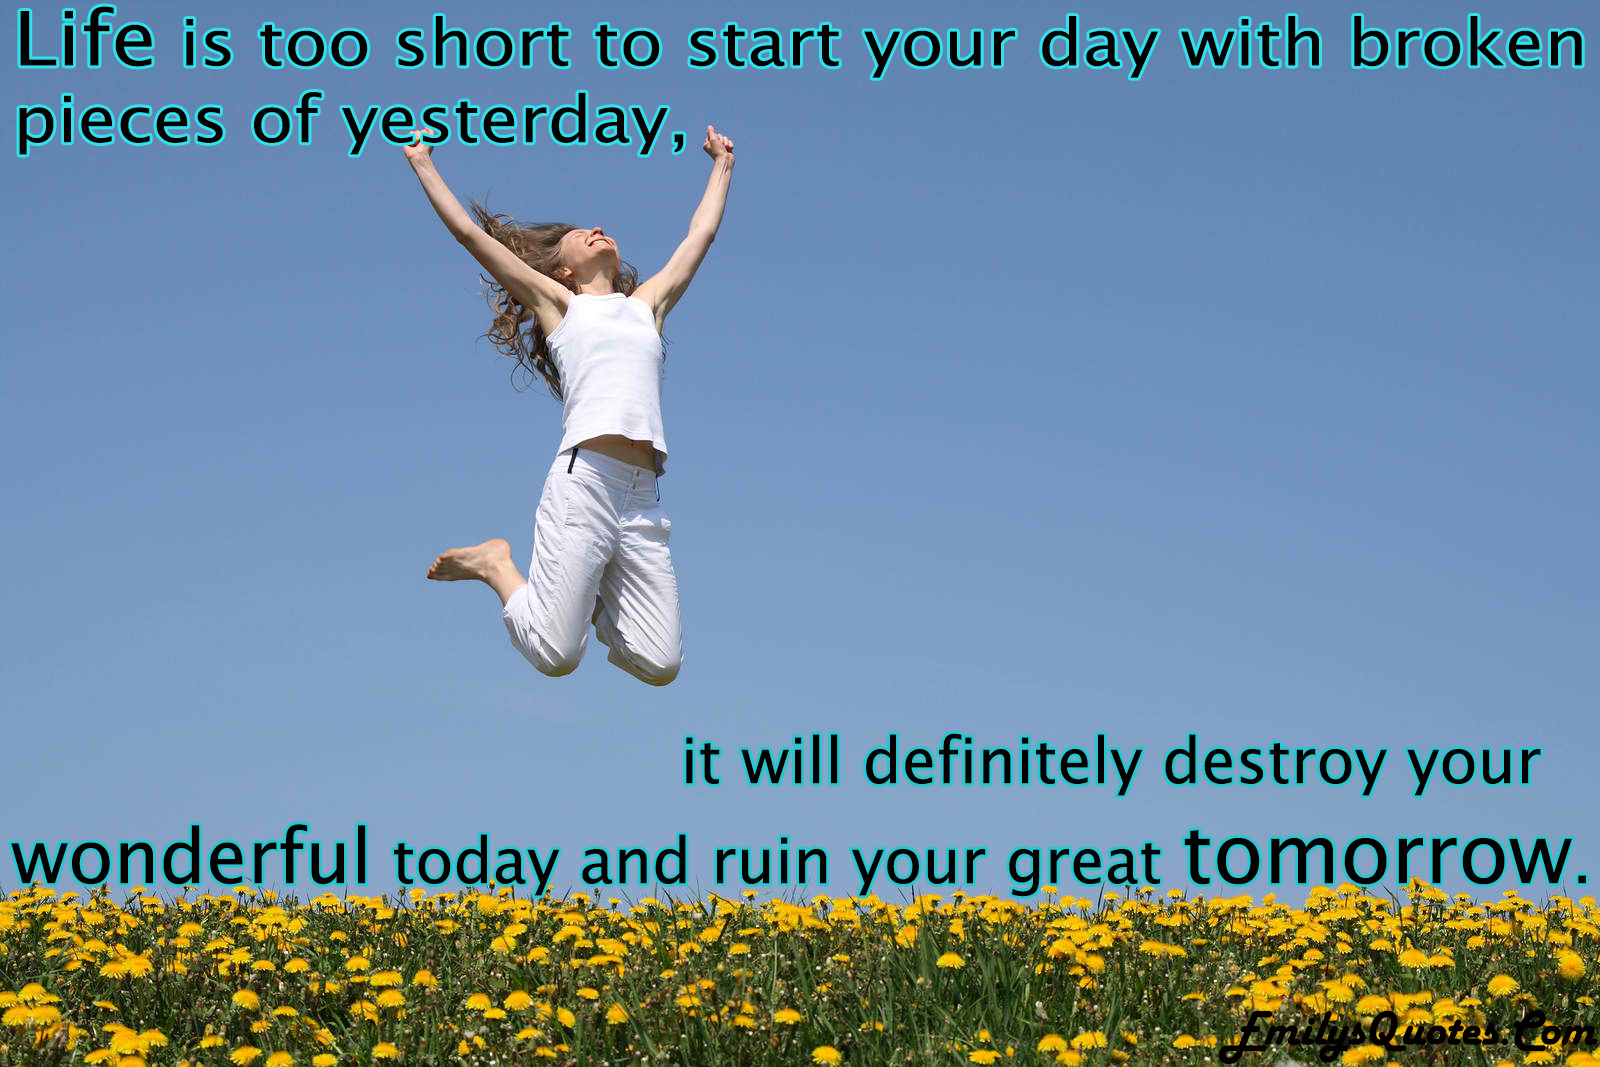 Life is too short to start your day with broken pieces of yesterday